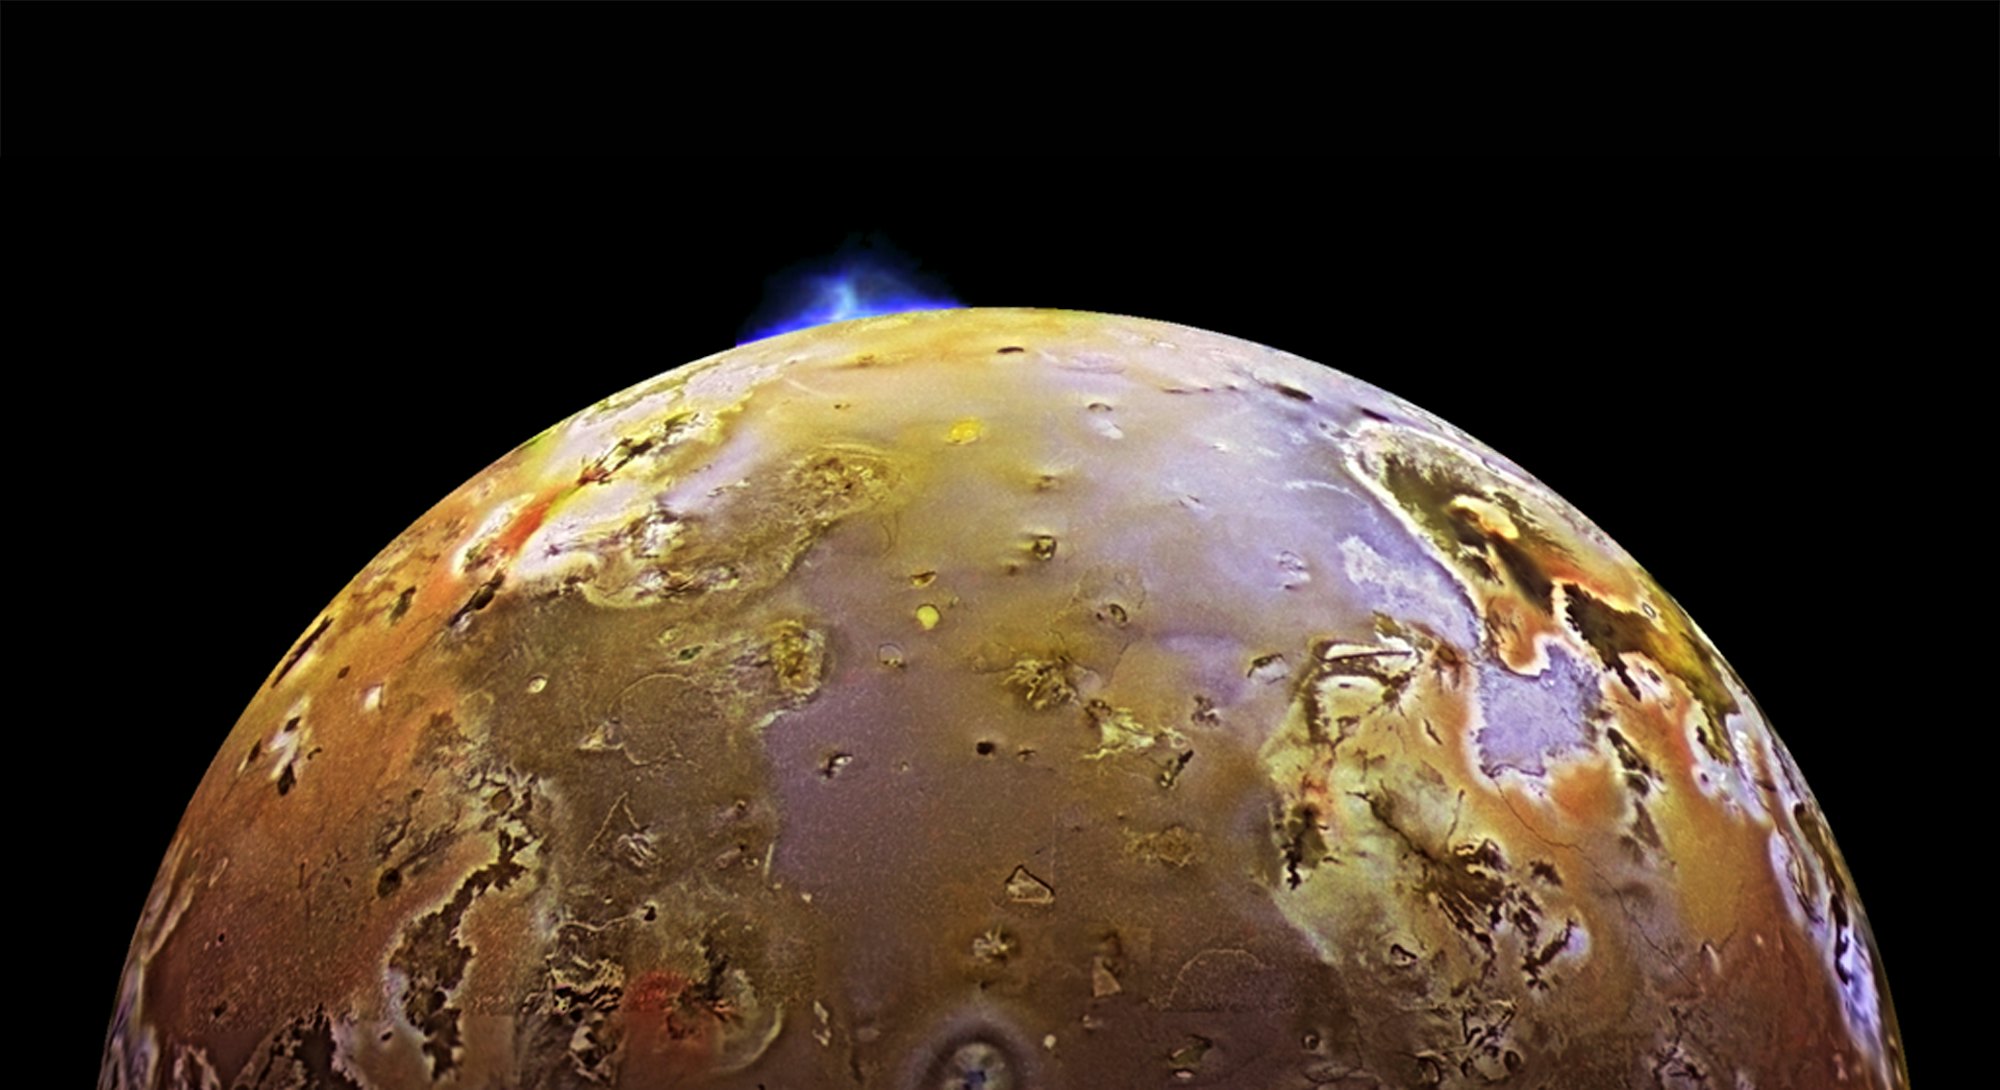 Voyager mission image of a volcanic eruption on Io, characterized by a bluish stream of light protru...